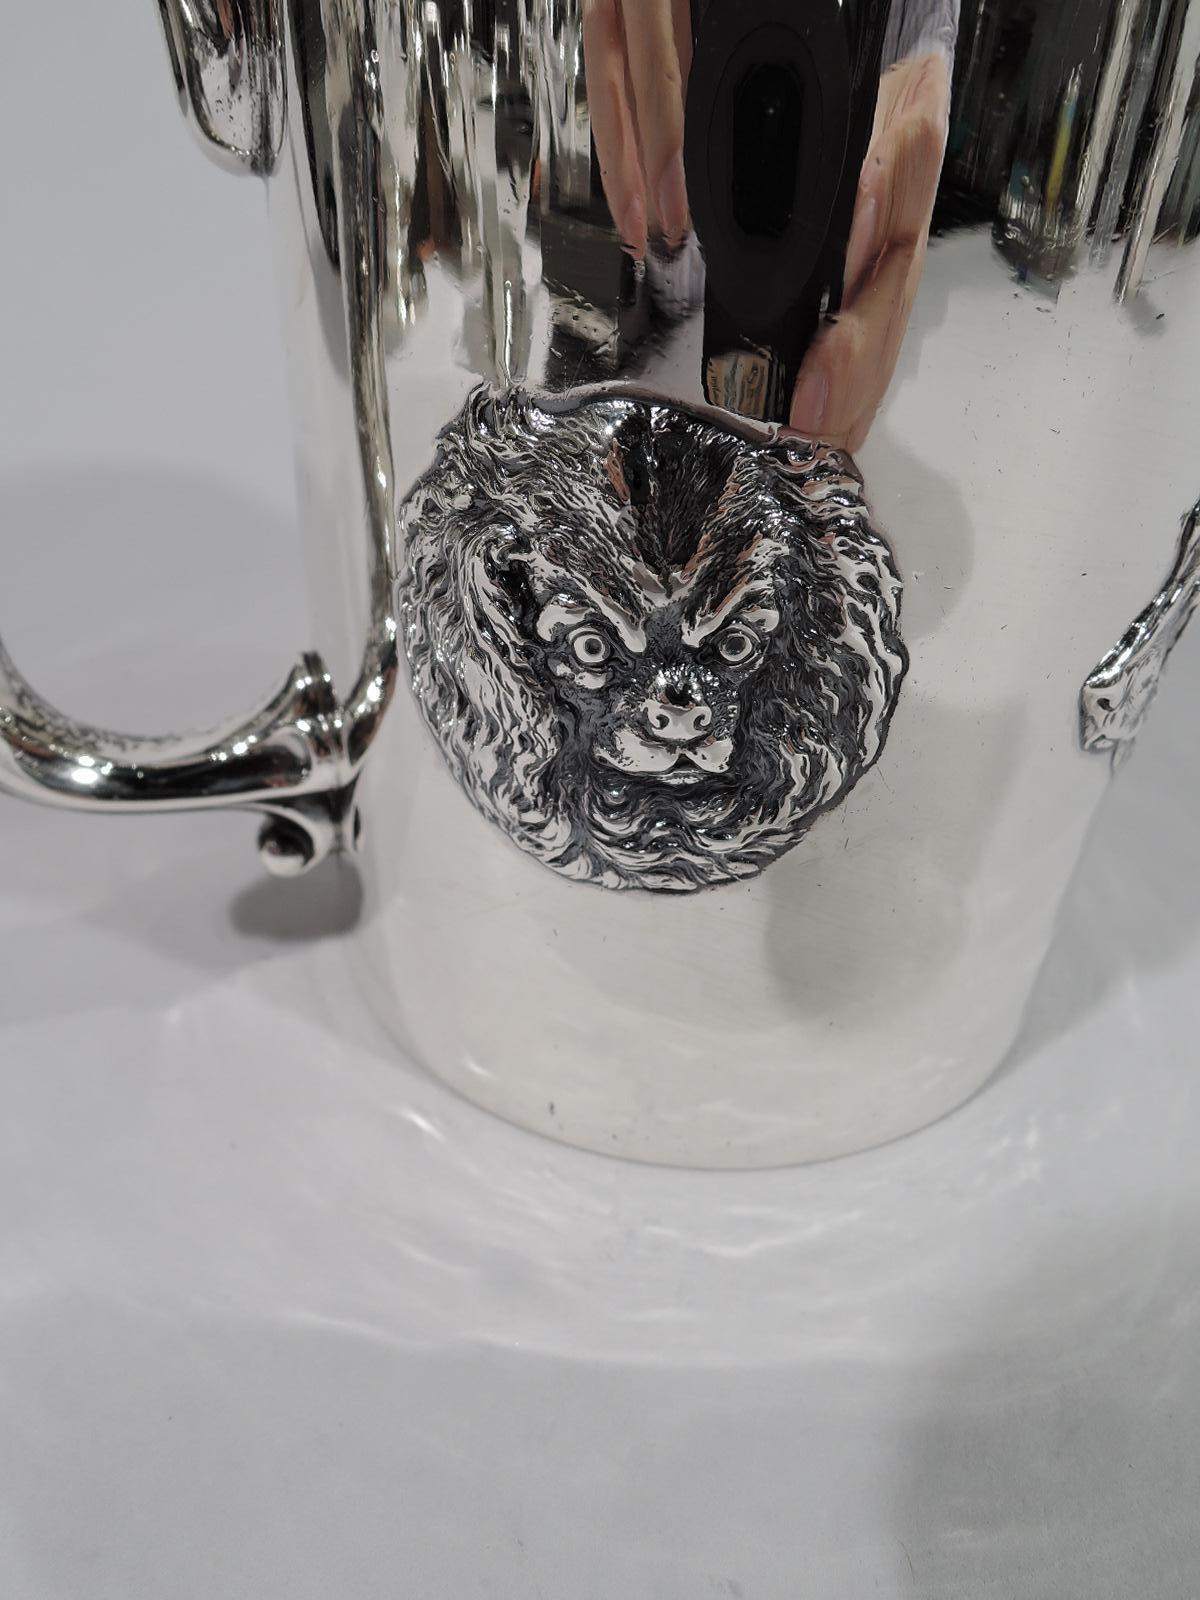 Late 19th Century Fido Mug, Antique Gorham Sterling Silver Baby Cup with Canine Medley